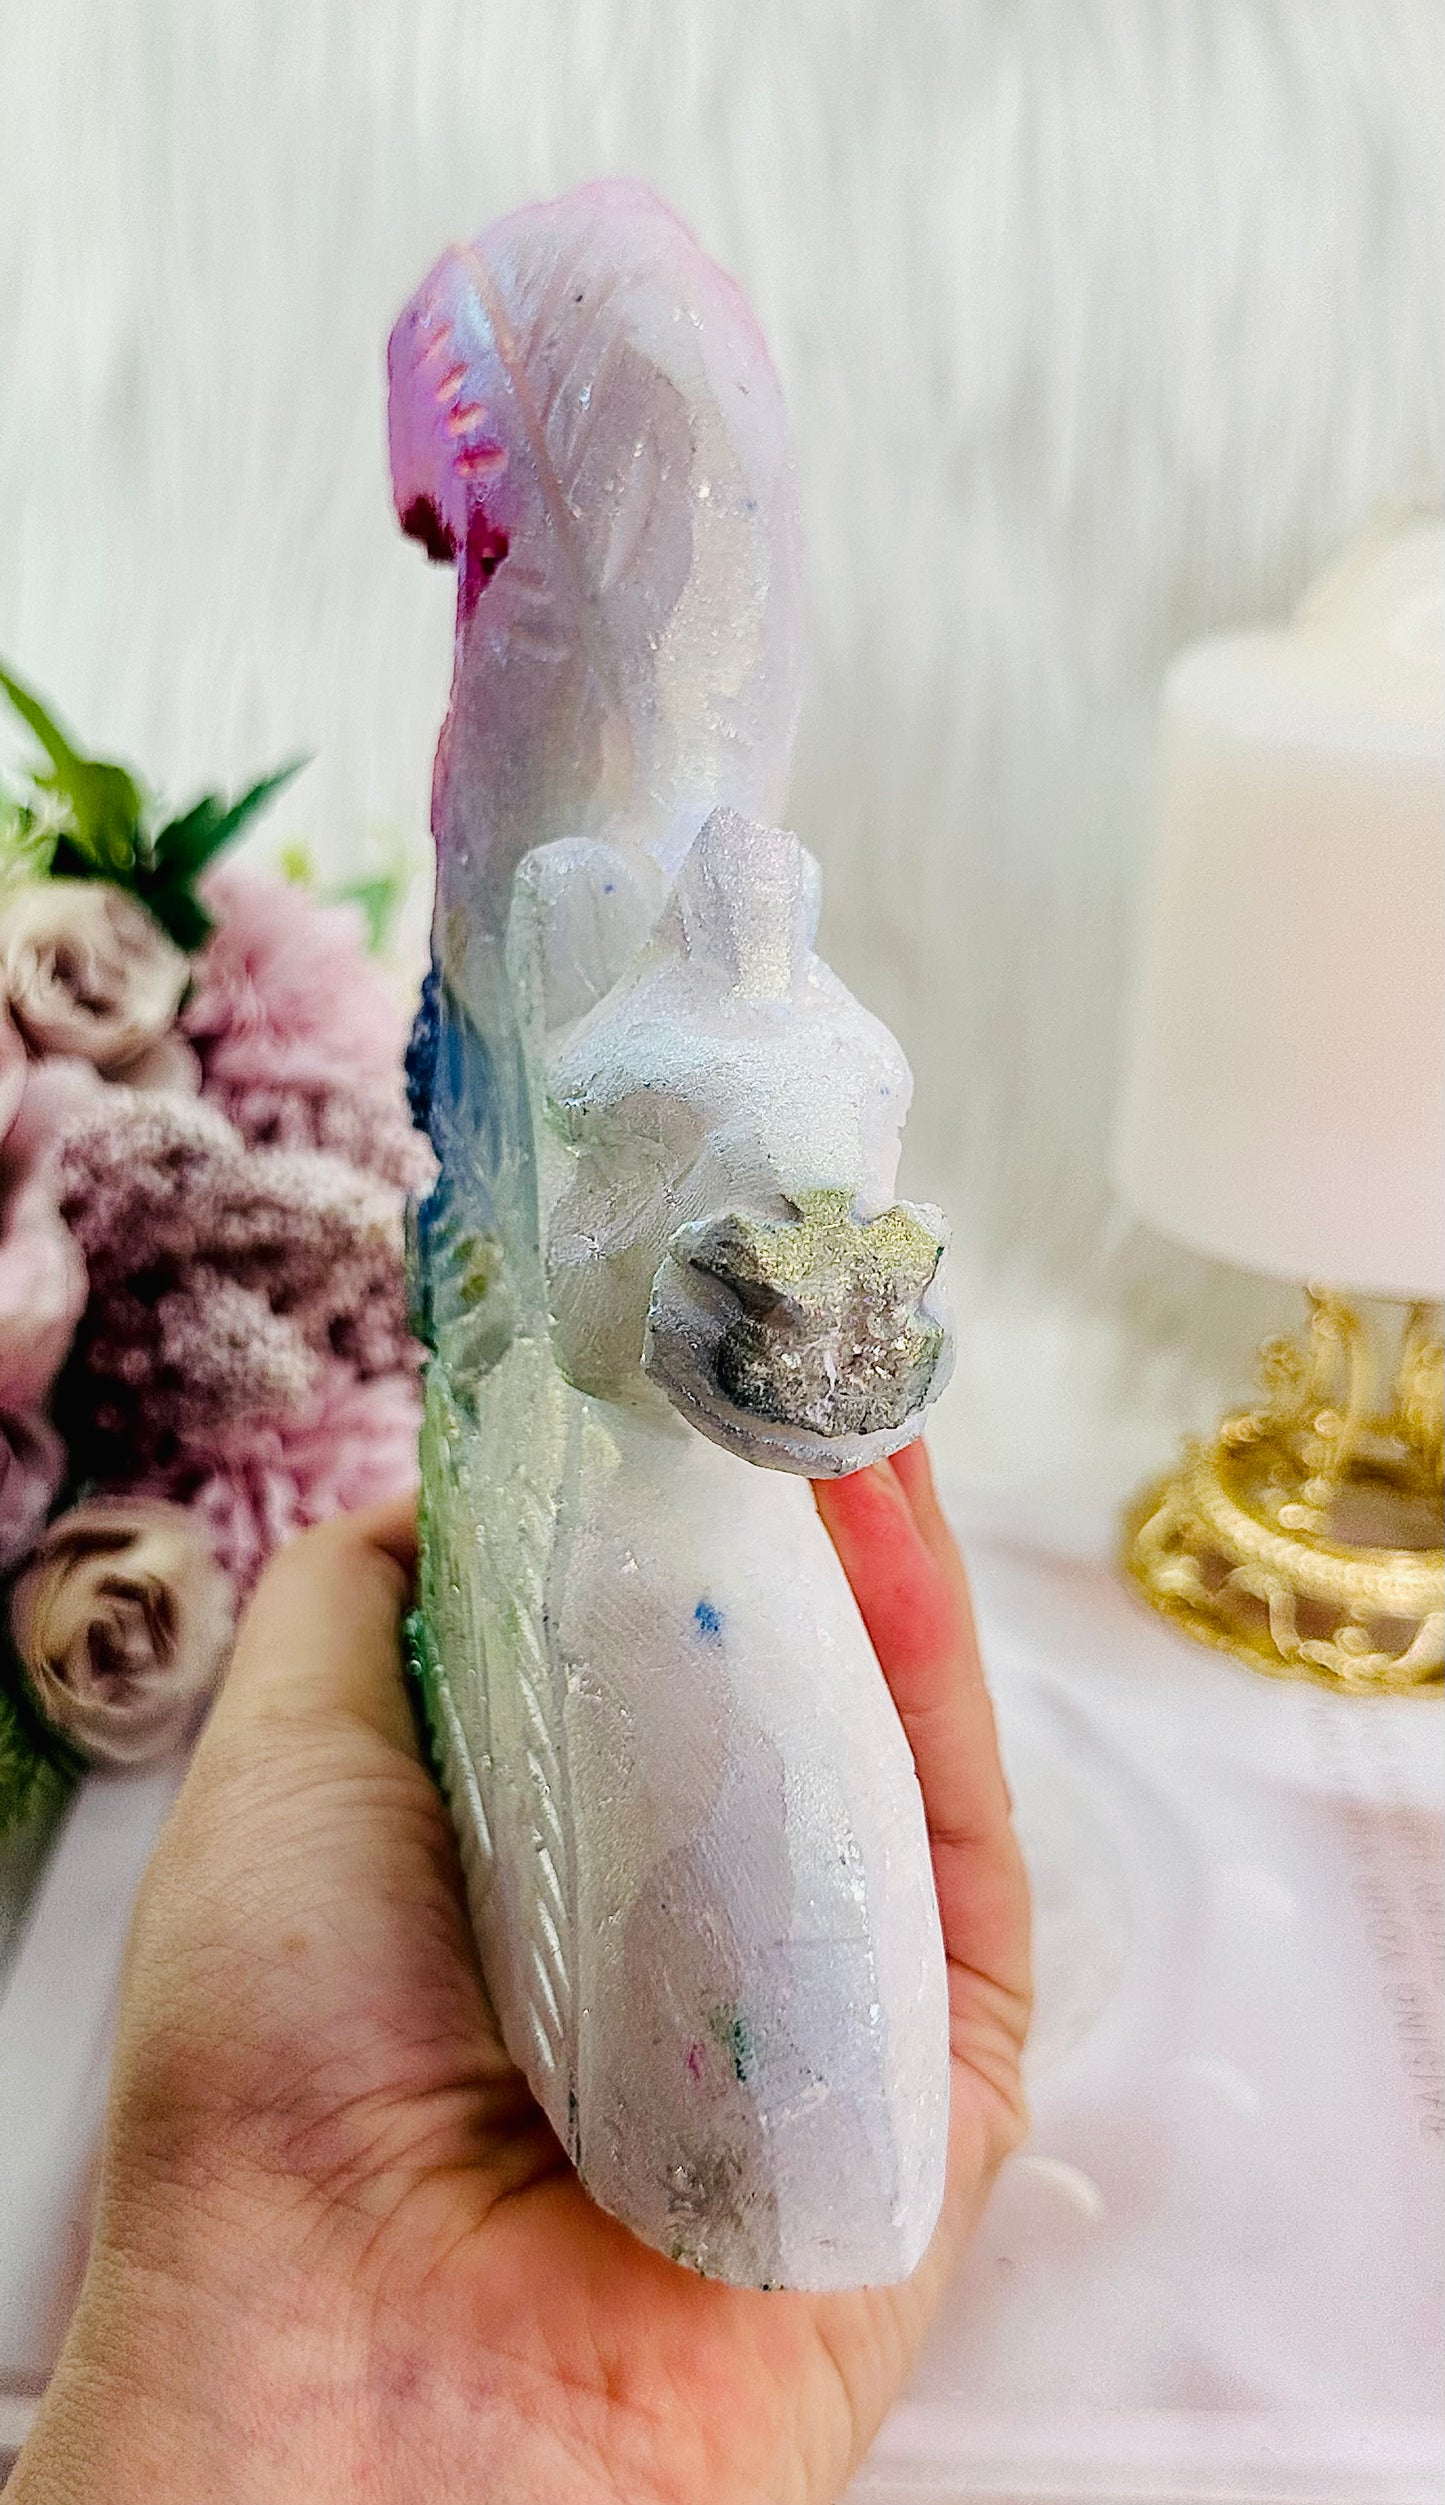 ⚜️ SALE ⚜️Absolutely Magical Large 856gram Aura Quartz Unicorn ~ Unfortunately she has been hurt in transit and has a broken horn ~ Half Price